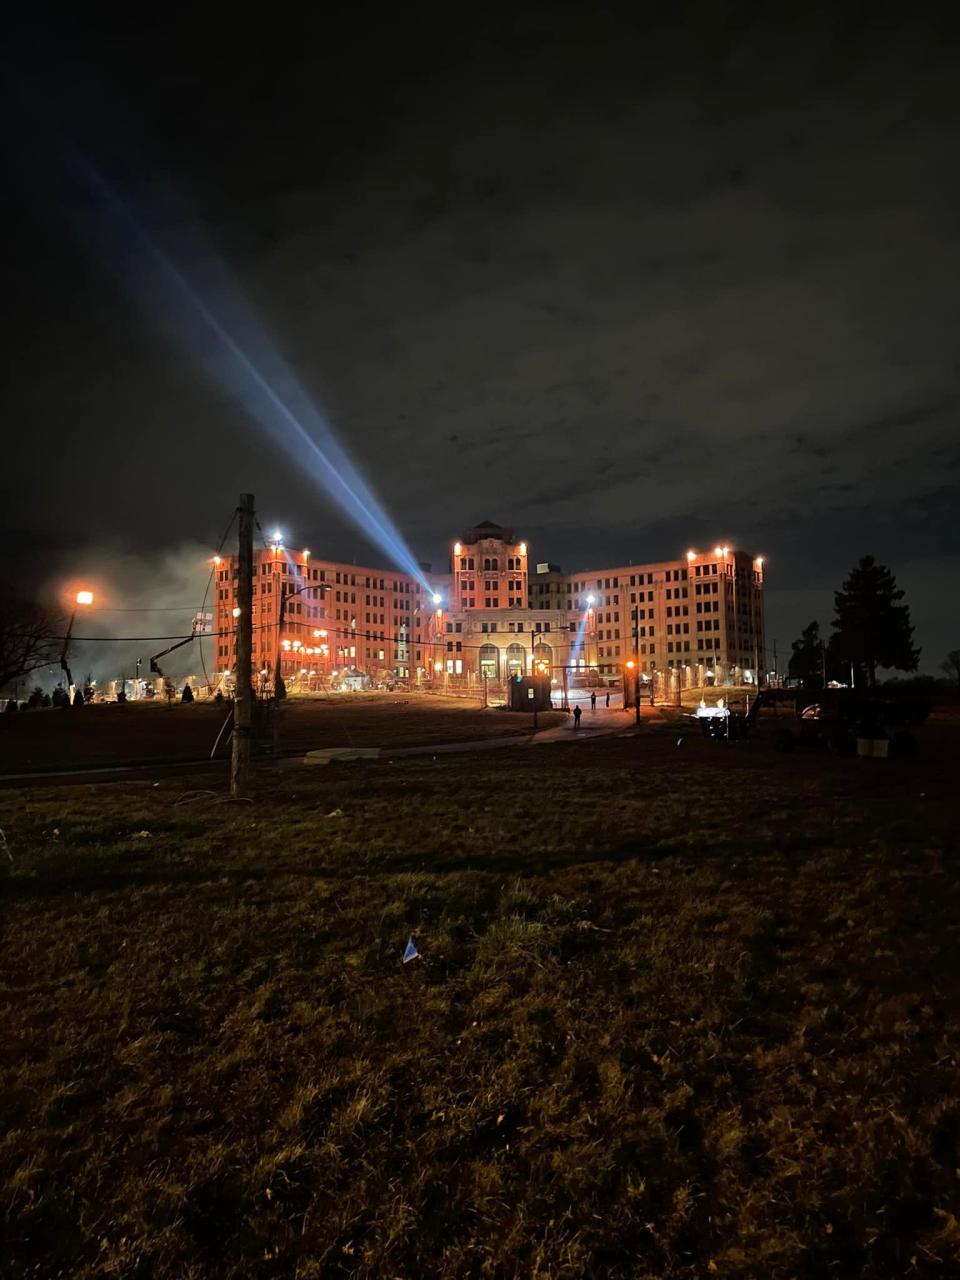 The shuttered Essex County Isolation Hospital in Belleville was lit up this week with film crews